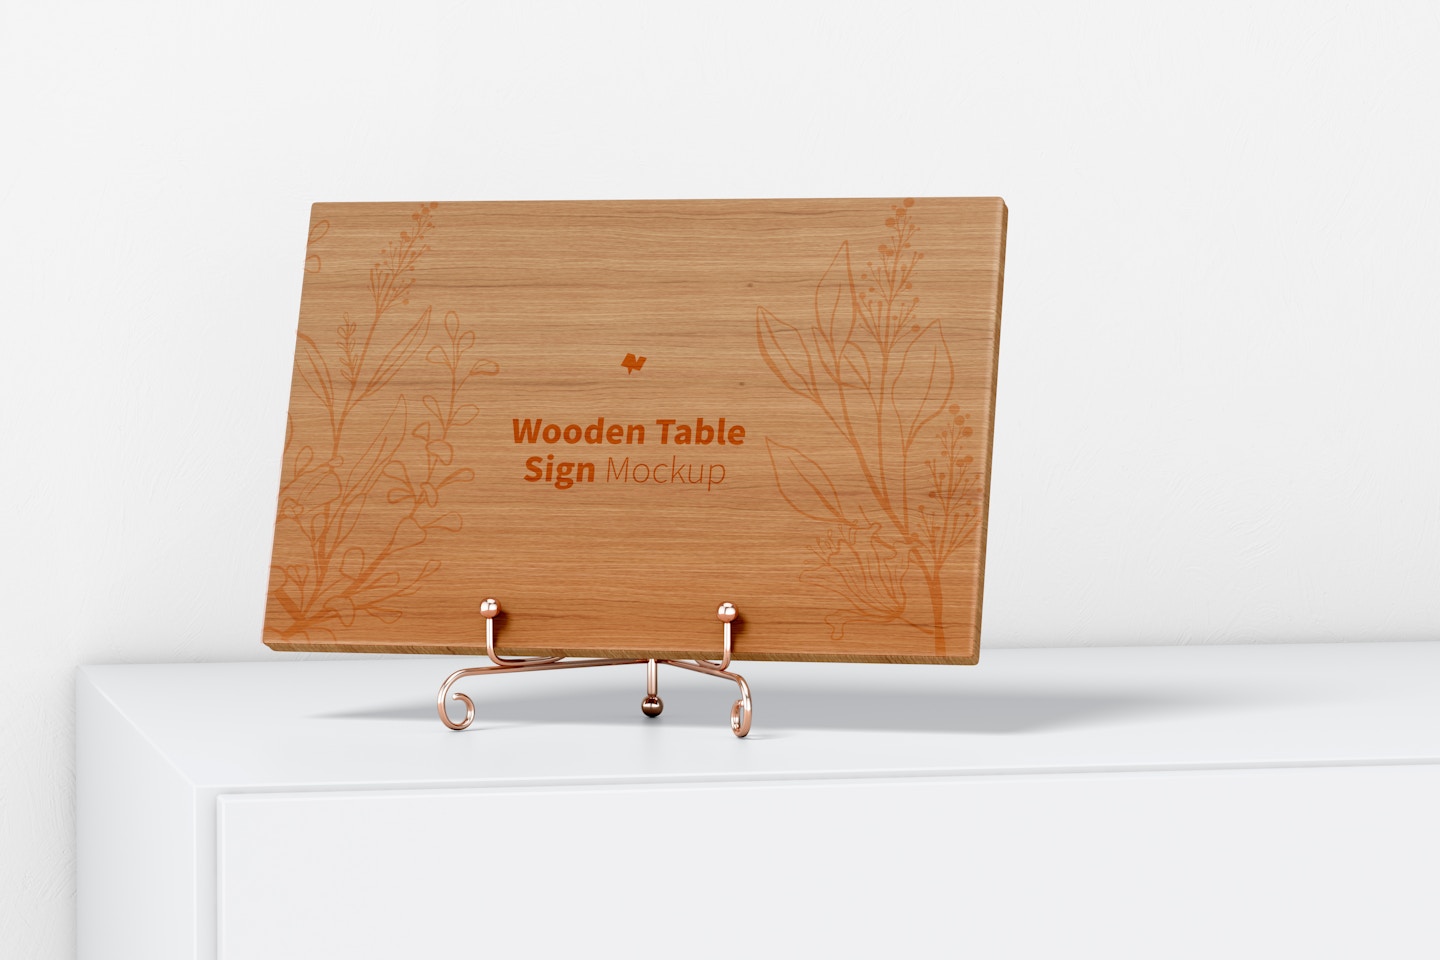 Wooden Table Sign on Surface Mockup